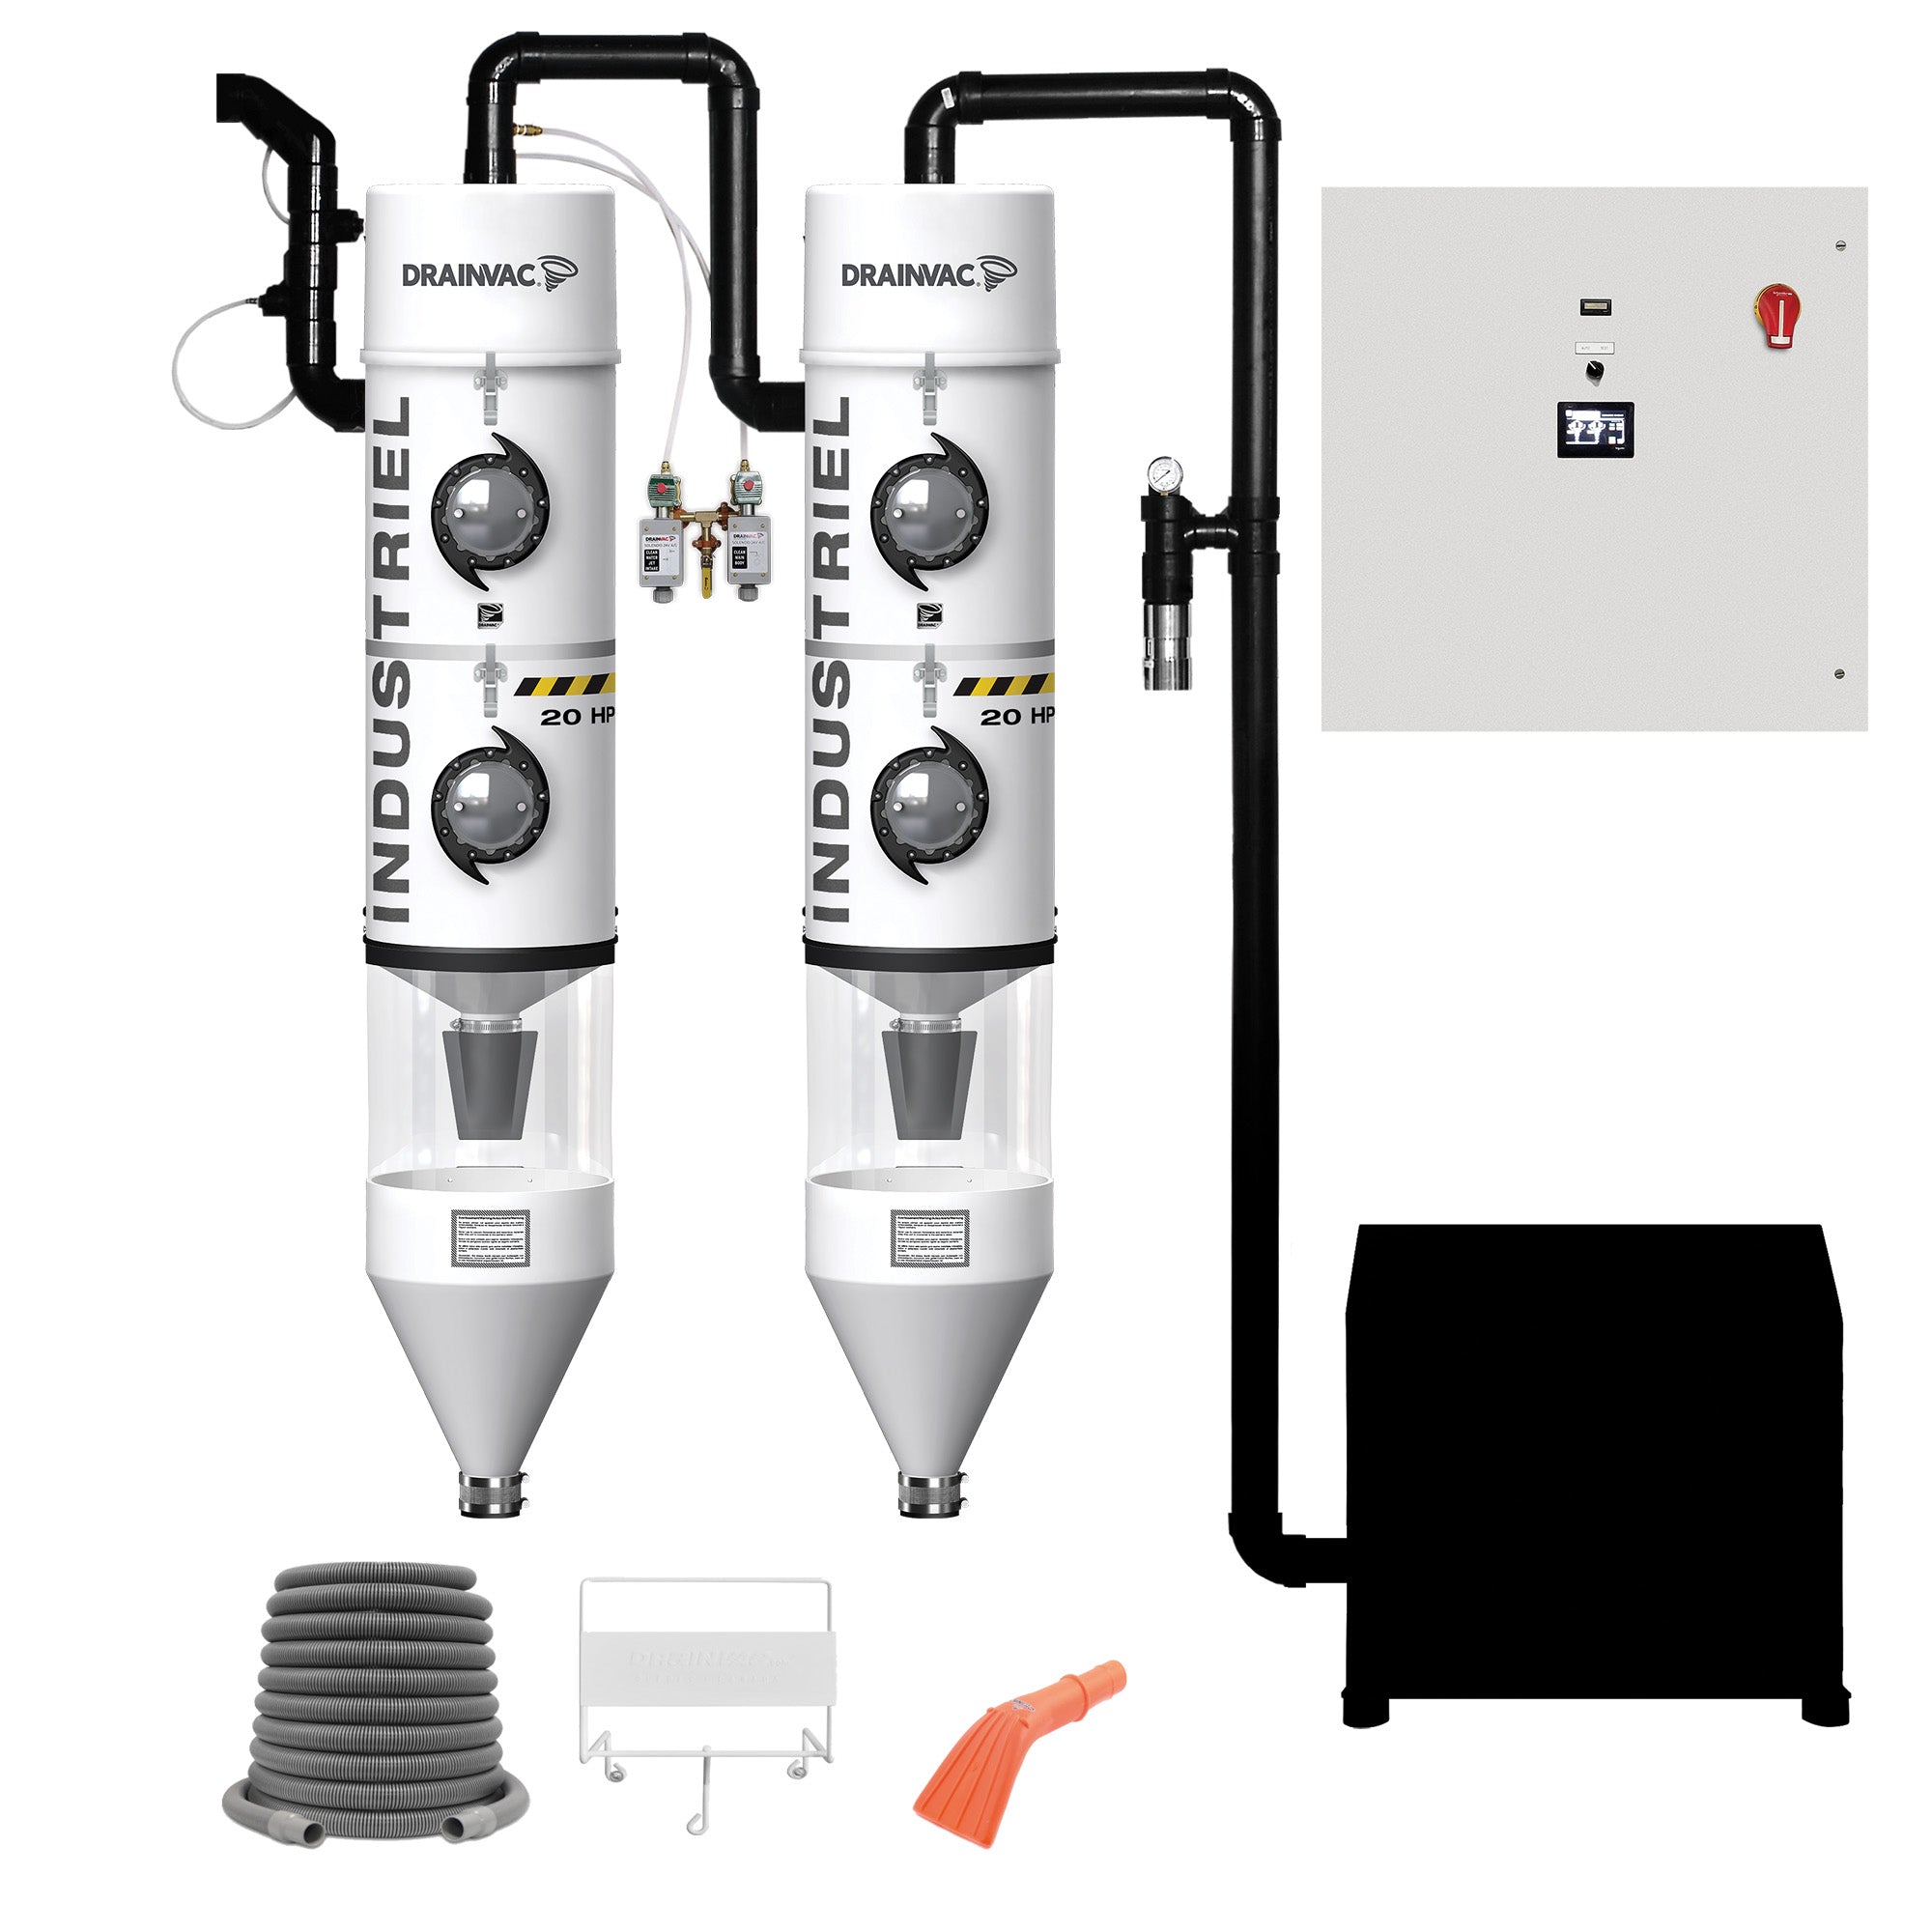 DrainVac DV2A684 Automatik Industrial Wet/Dry Central Vacuum System with Self-Flushing Separators and REGEN17HP Motor